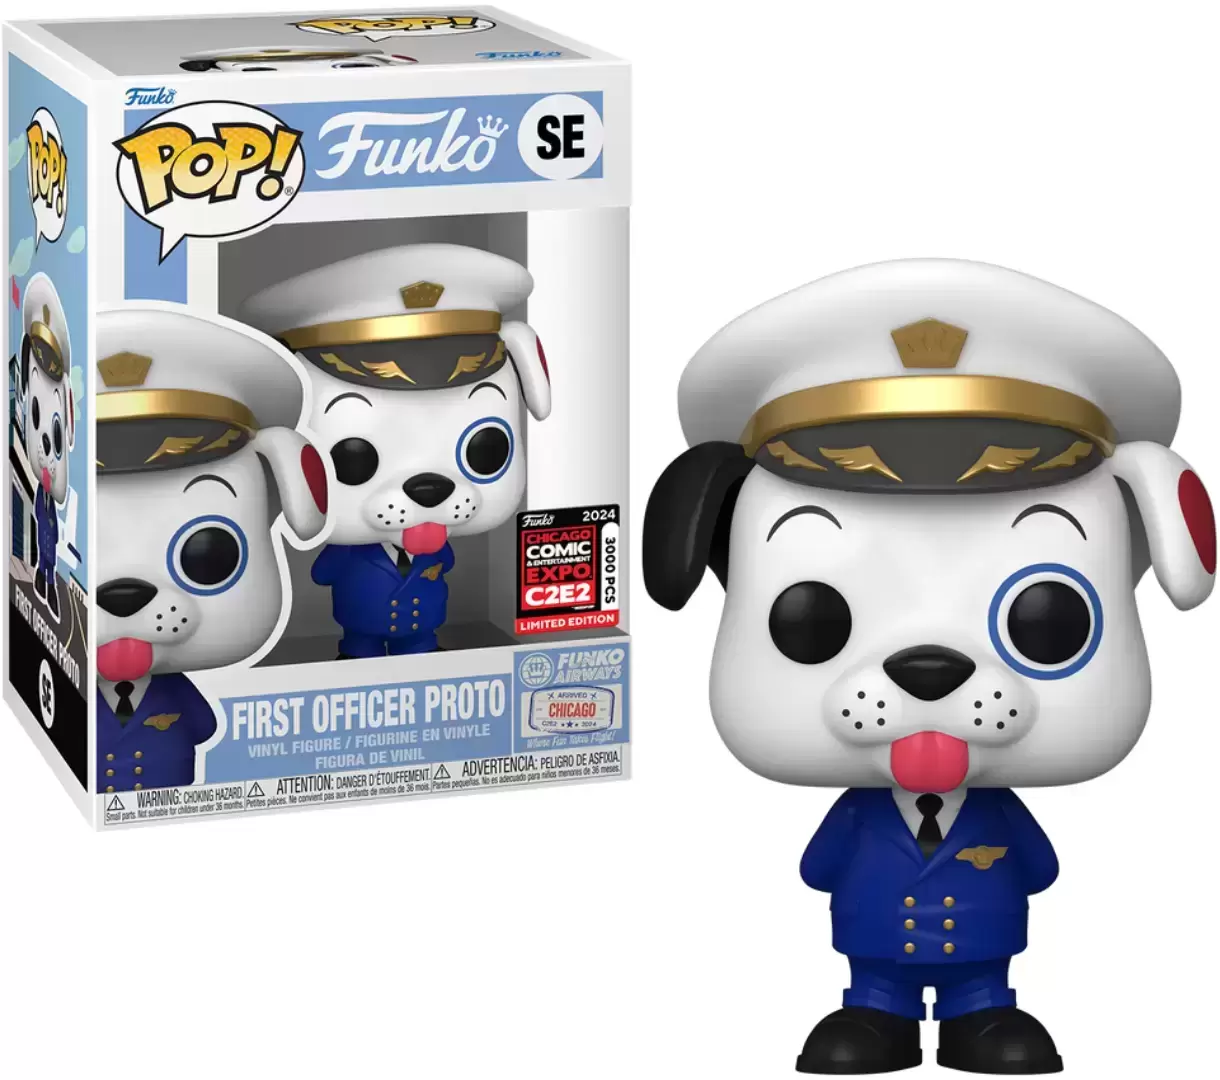 POP! Funko - First Officer Proto